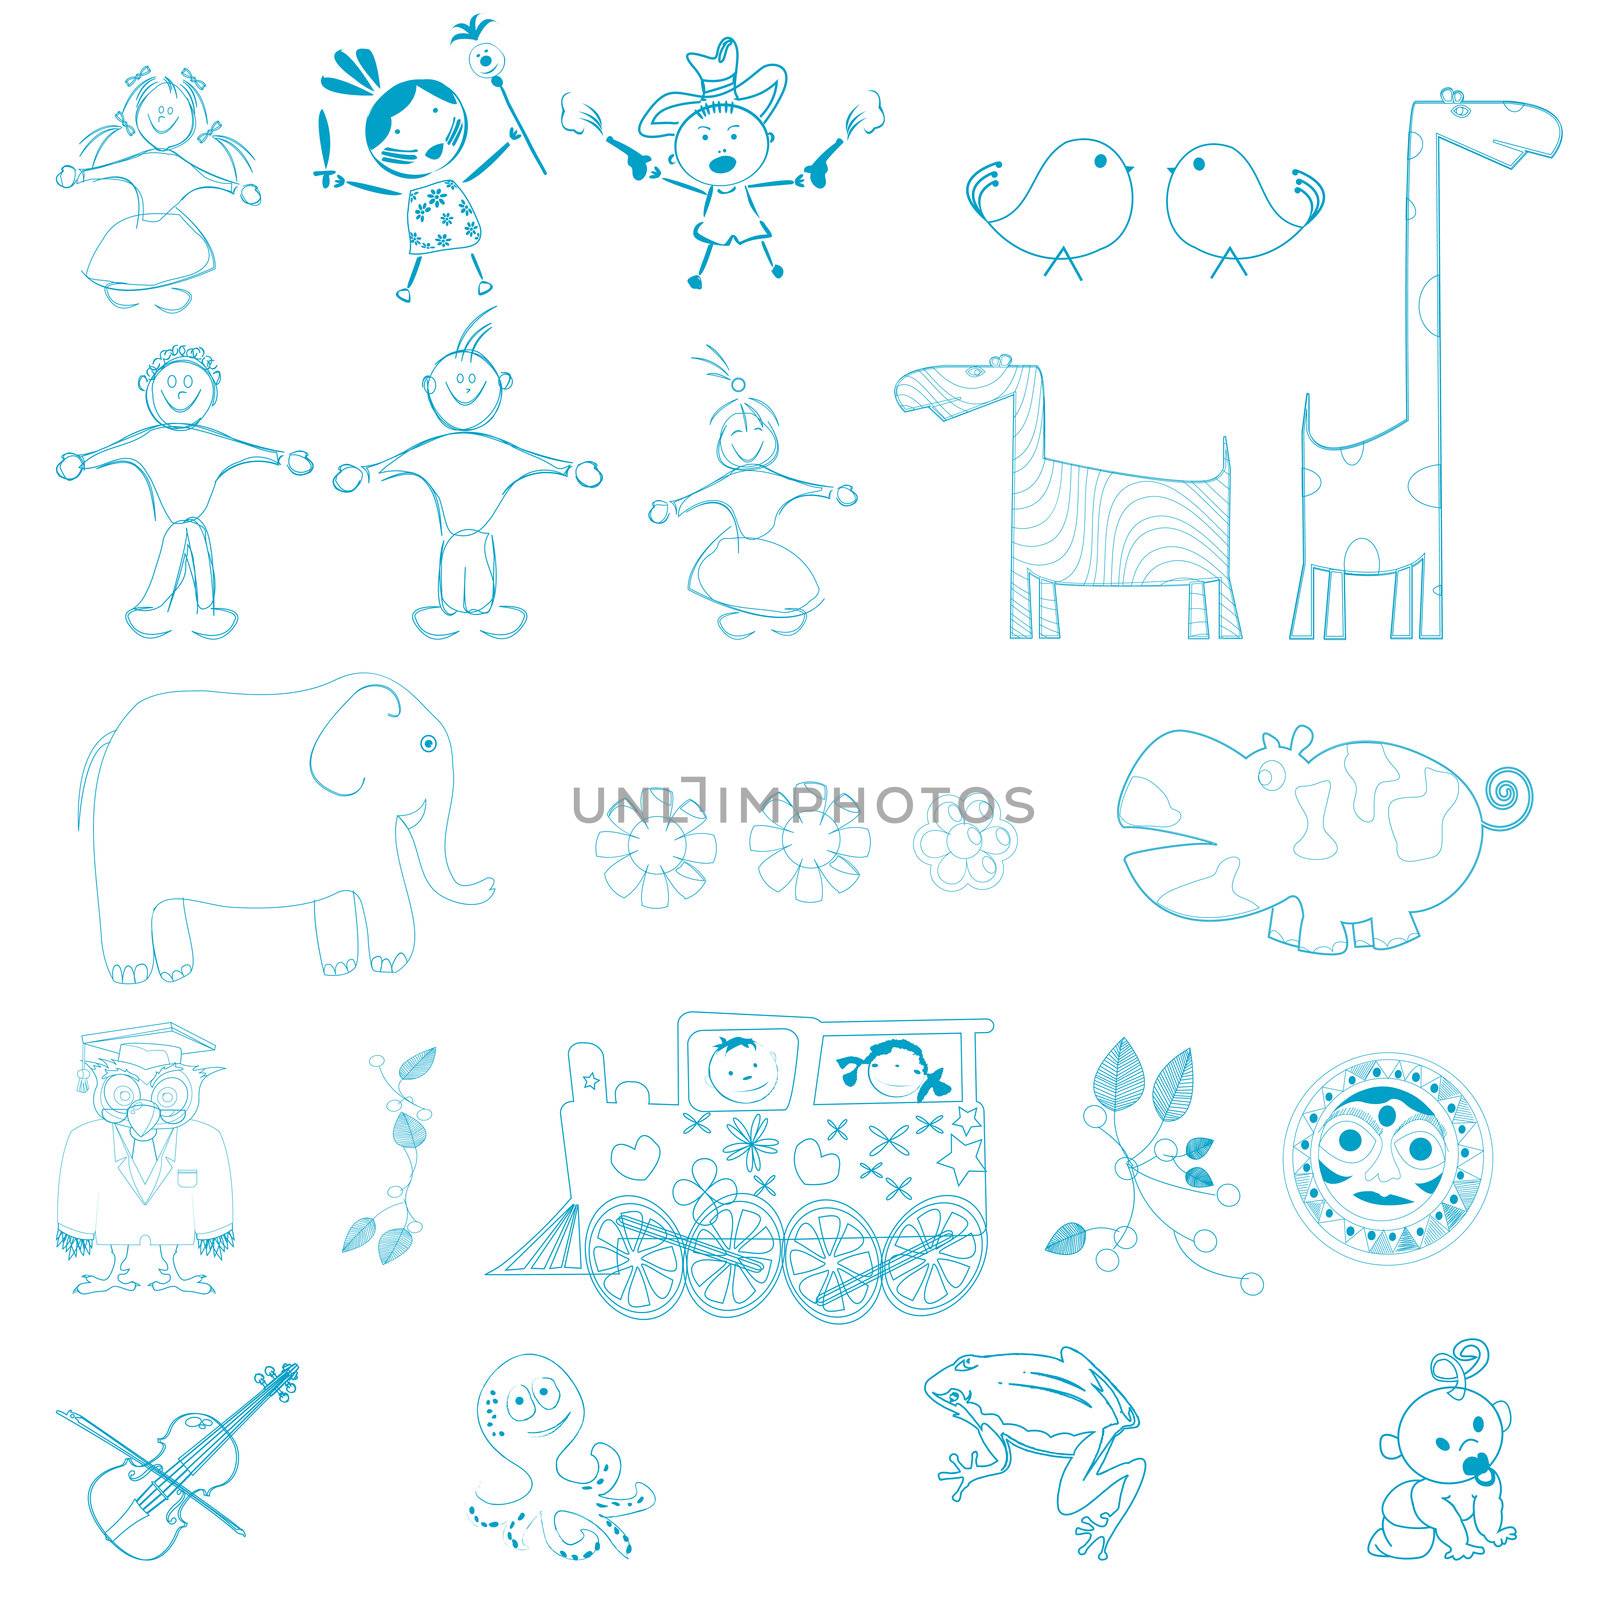 Doodles, cartoon outlines characters over white background, easy to edit, fill with color.